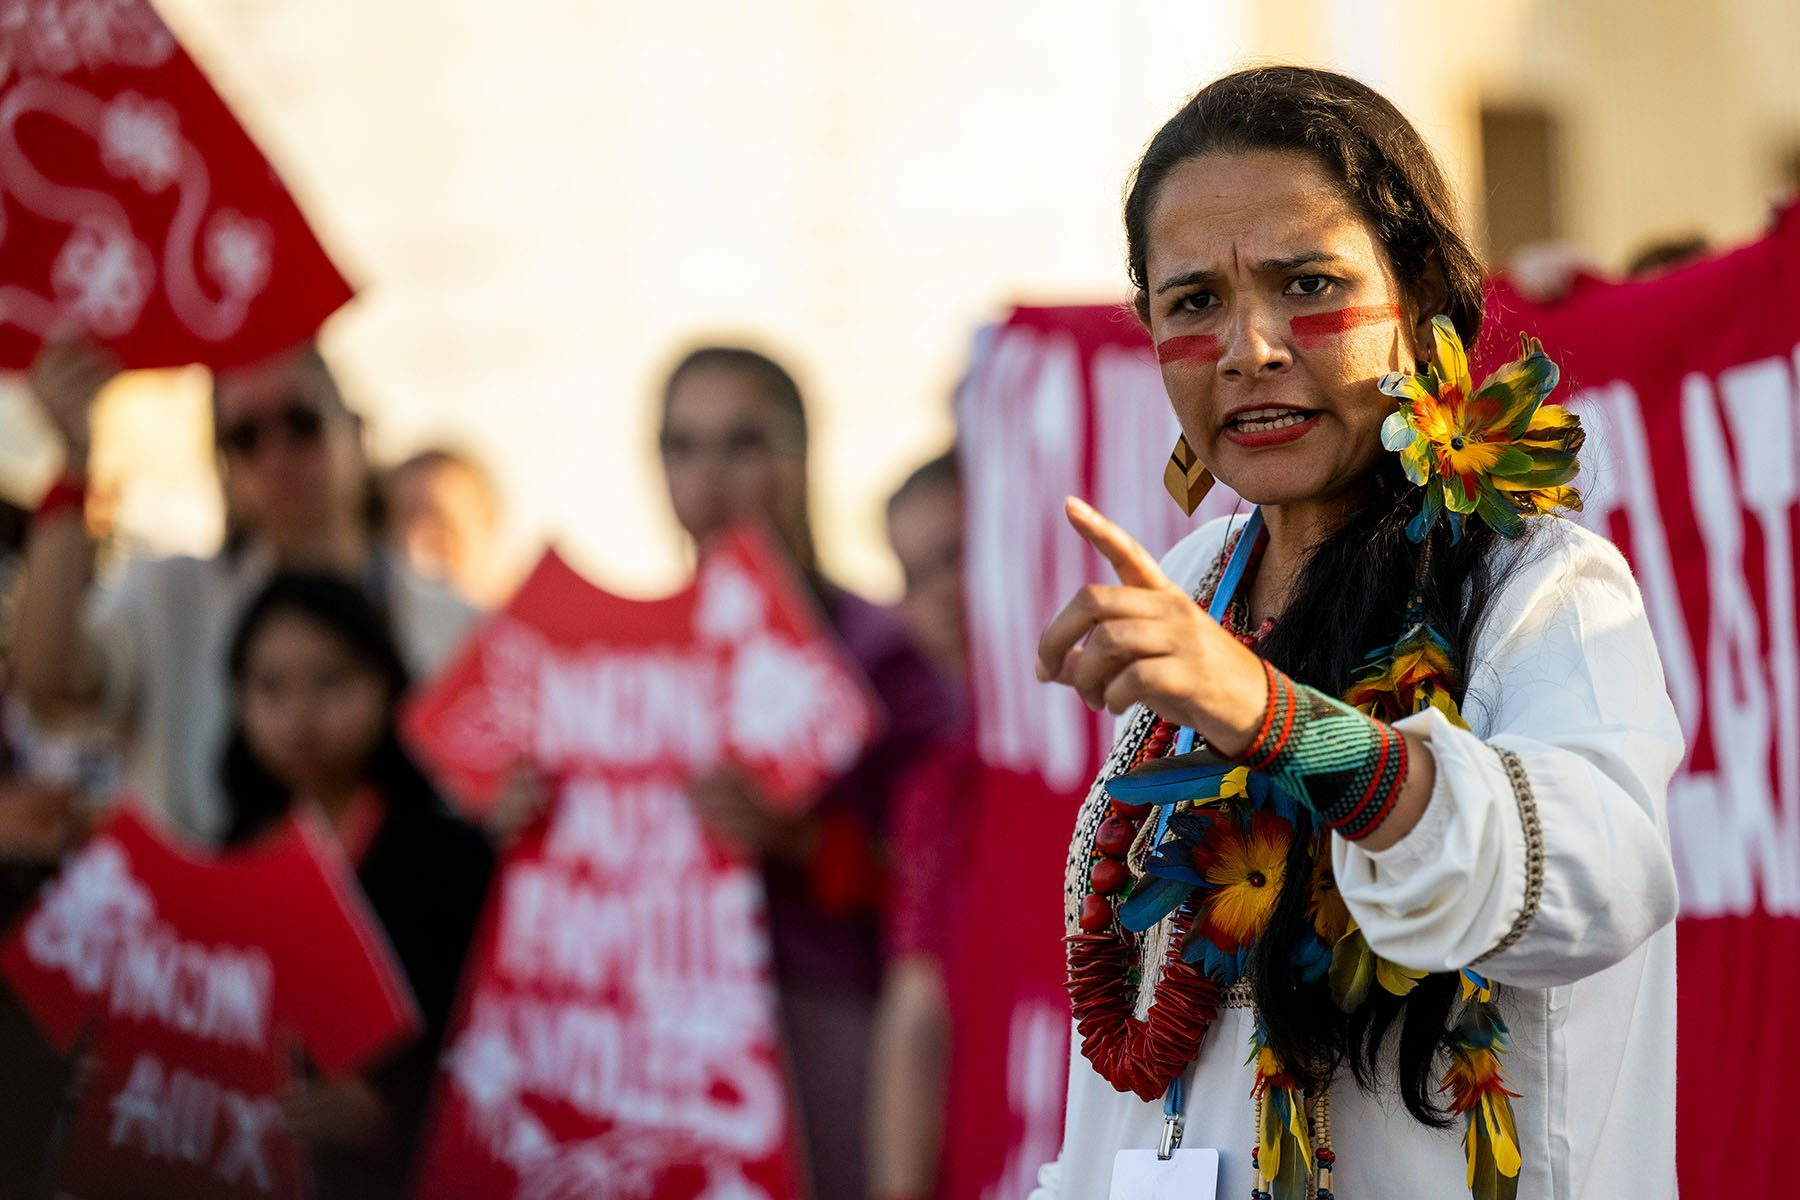 An Indigenous woman speaks during a demonstration calling attention to stolen land at the COP27 U.N. Climate Summit in Sharm el-Sheikh, Egypt. Photo: Christophe Gateau / Picture Alliance / Getty Images